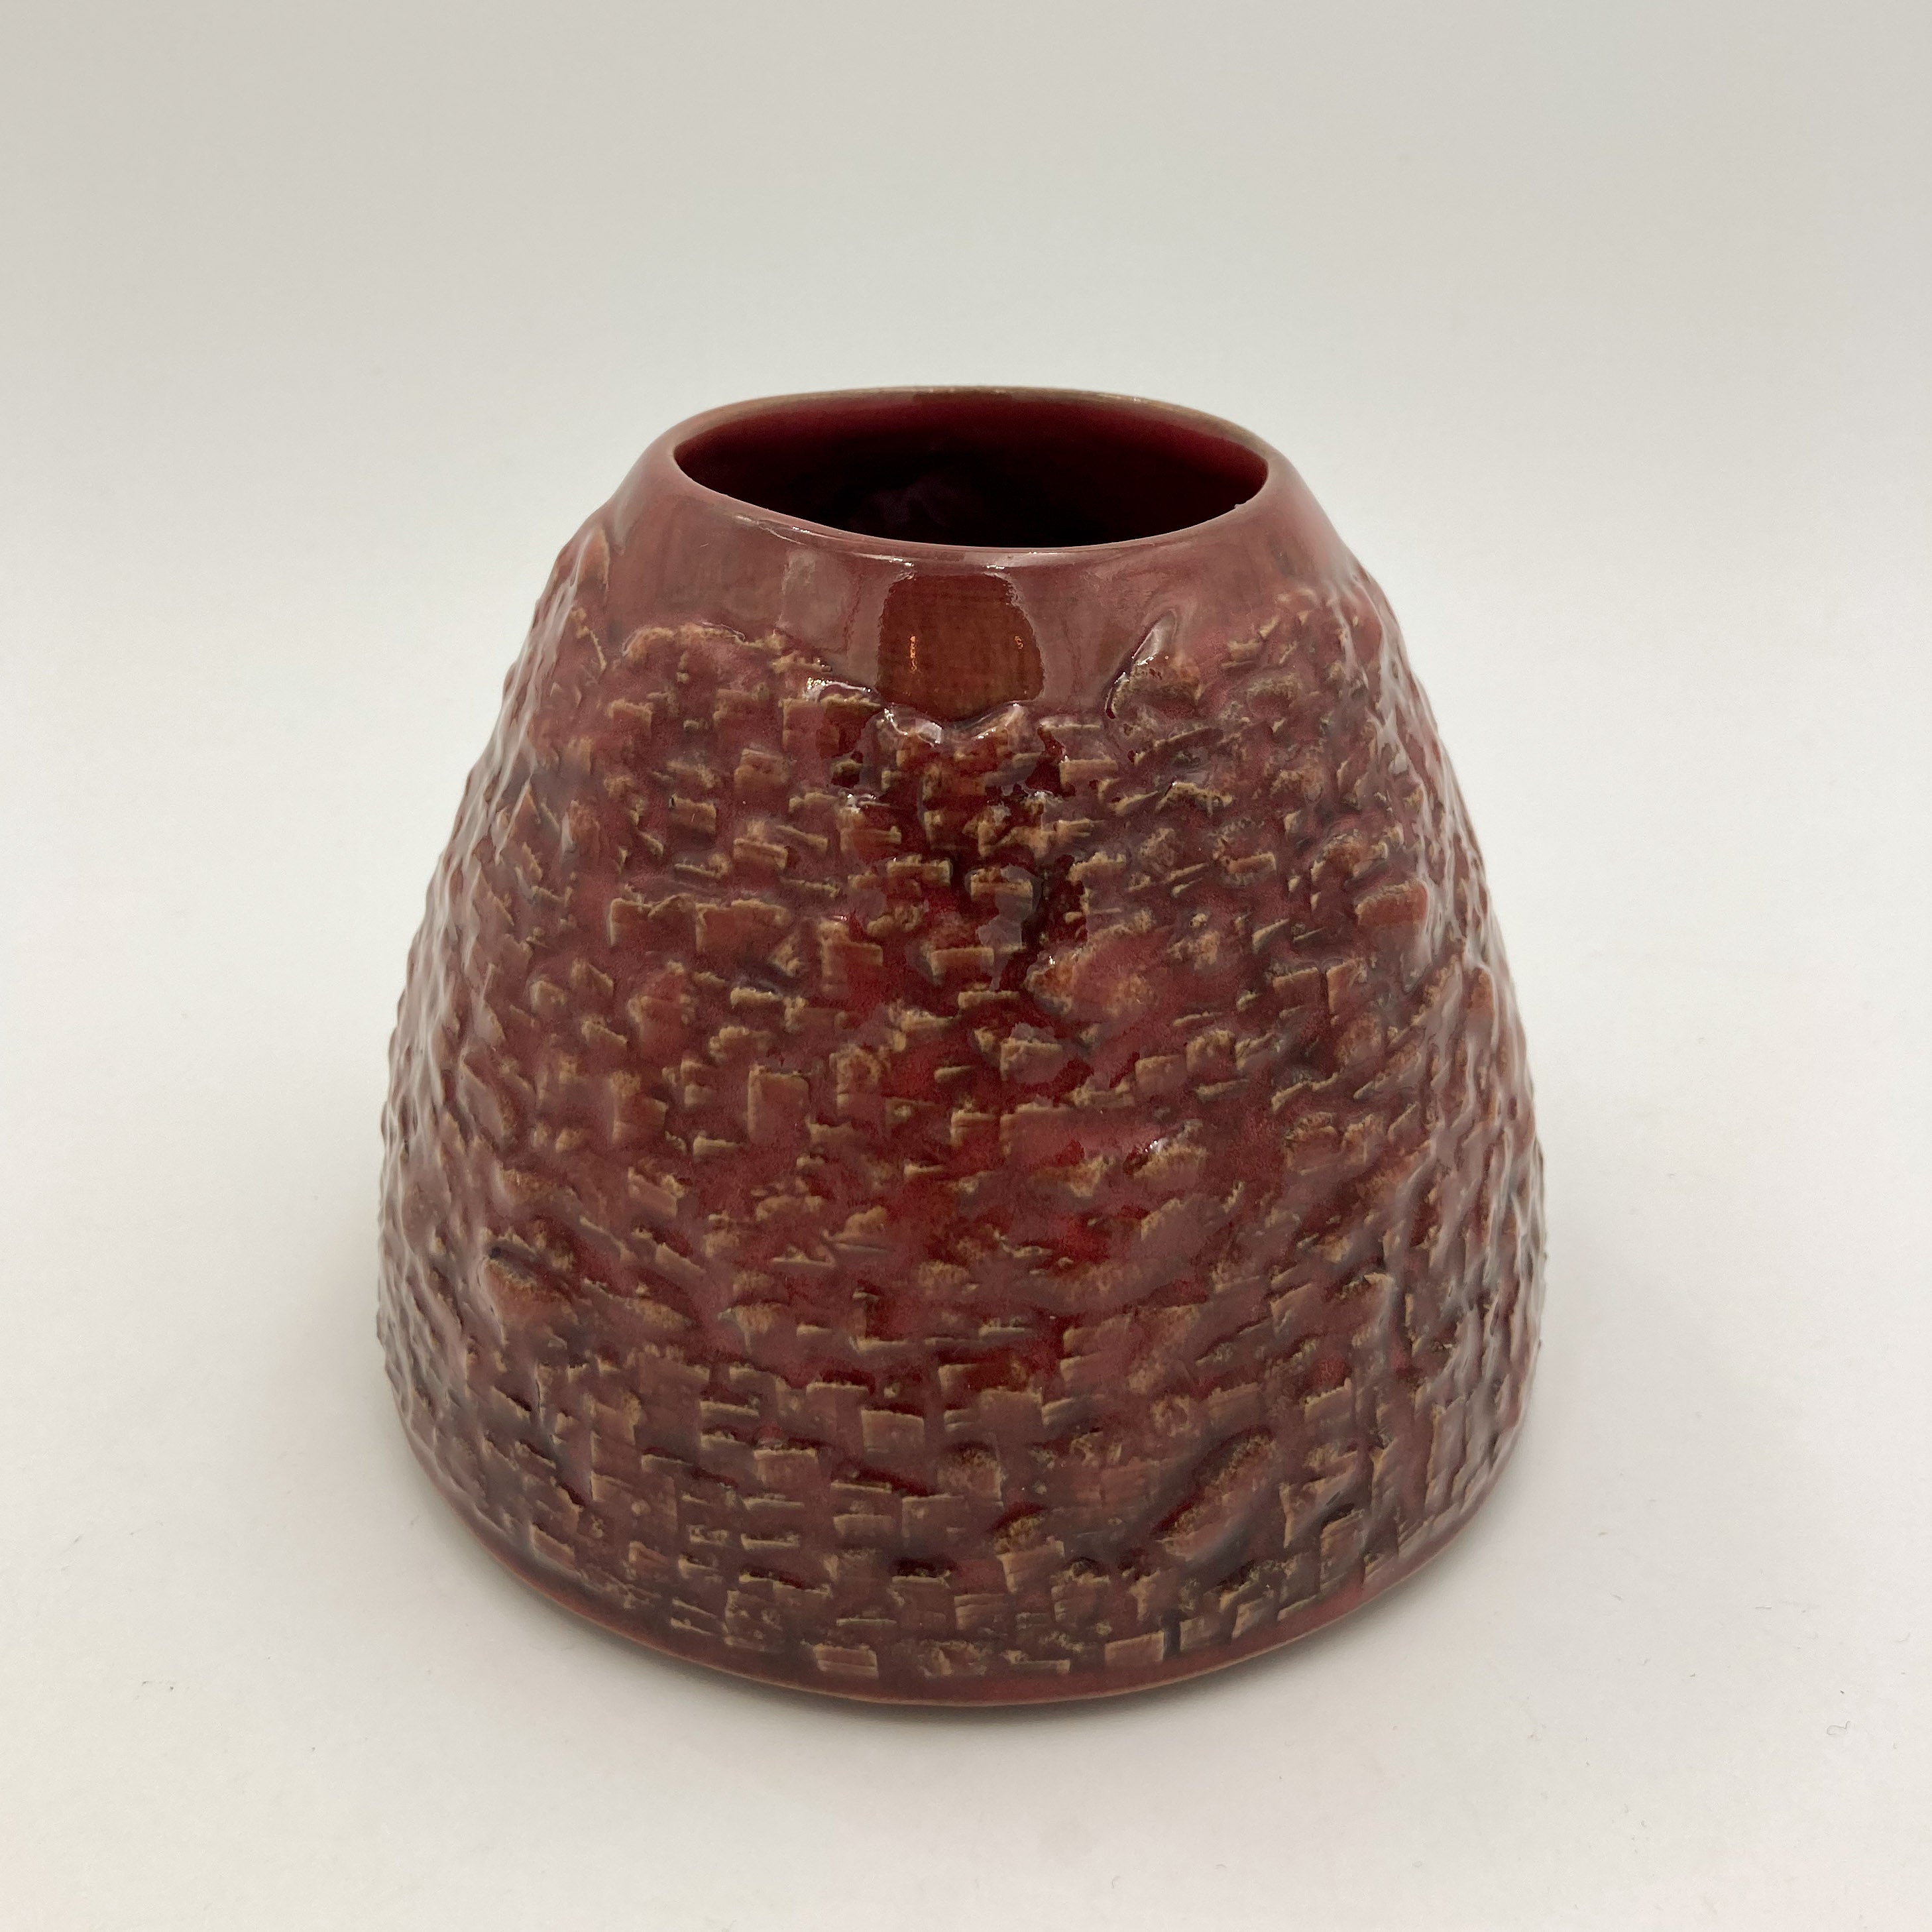 Volcanic-The Rock Garden Collection (Red)